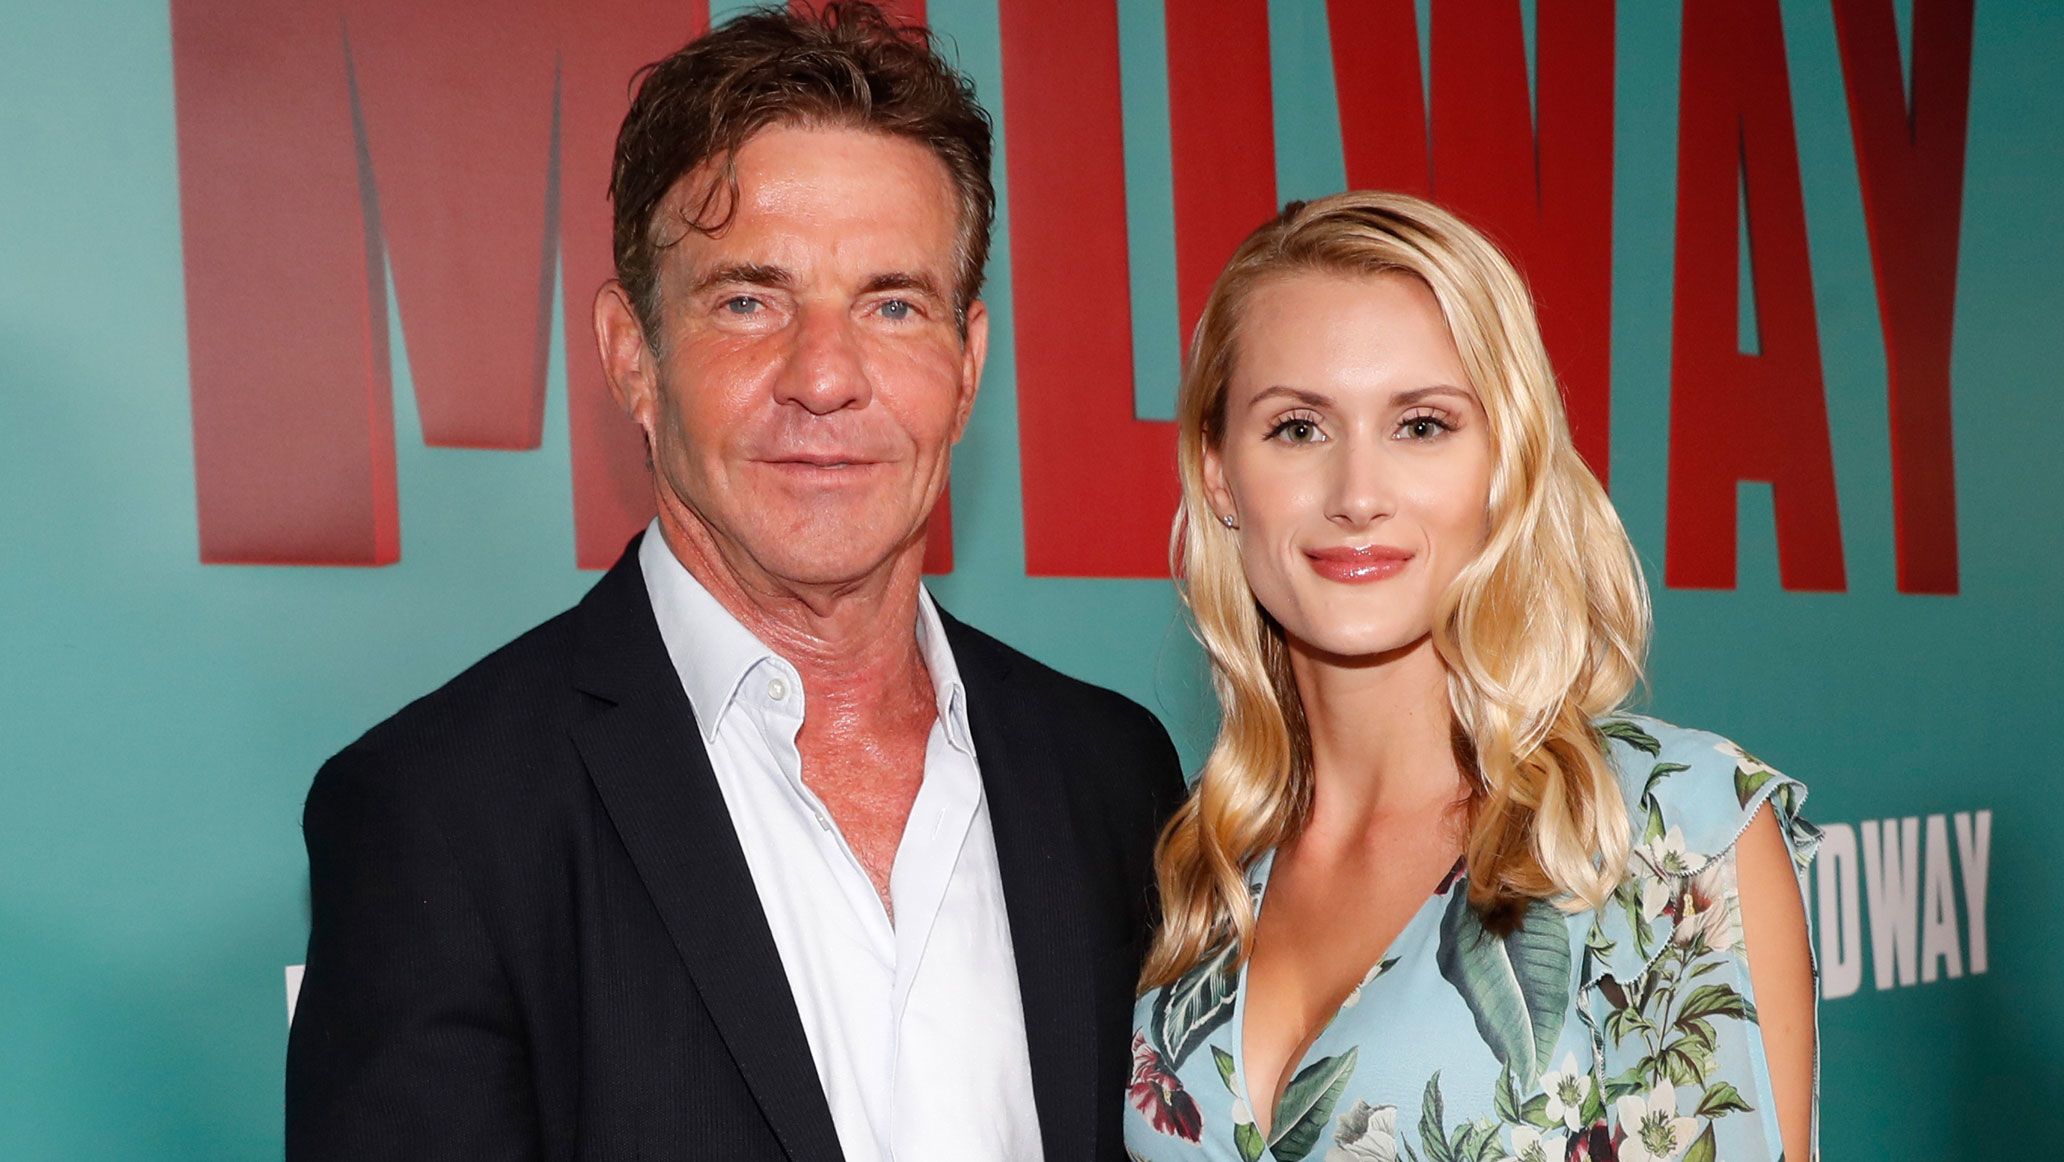 Dennis Quaid and fiancee Laura Savoie arrive at the "Midway" Special Screening at Joint Base Pearl Harbor-Hickam on October 20, 2019 in Honolulu, Hawaii. 